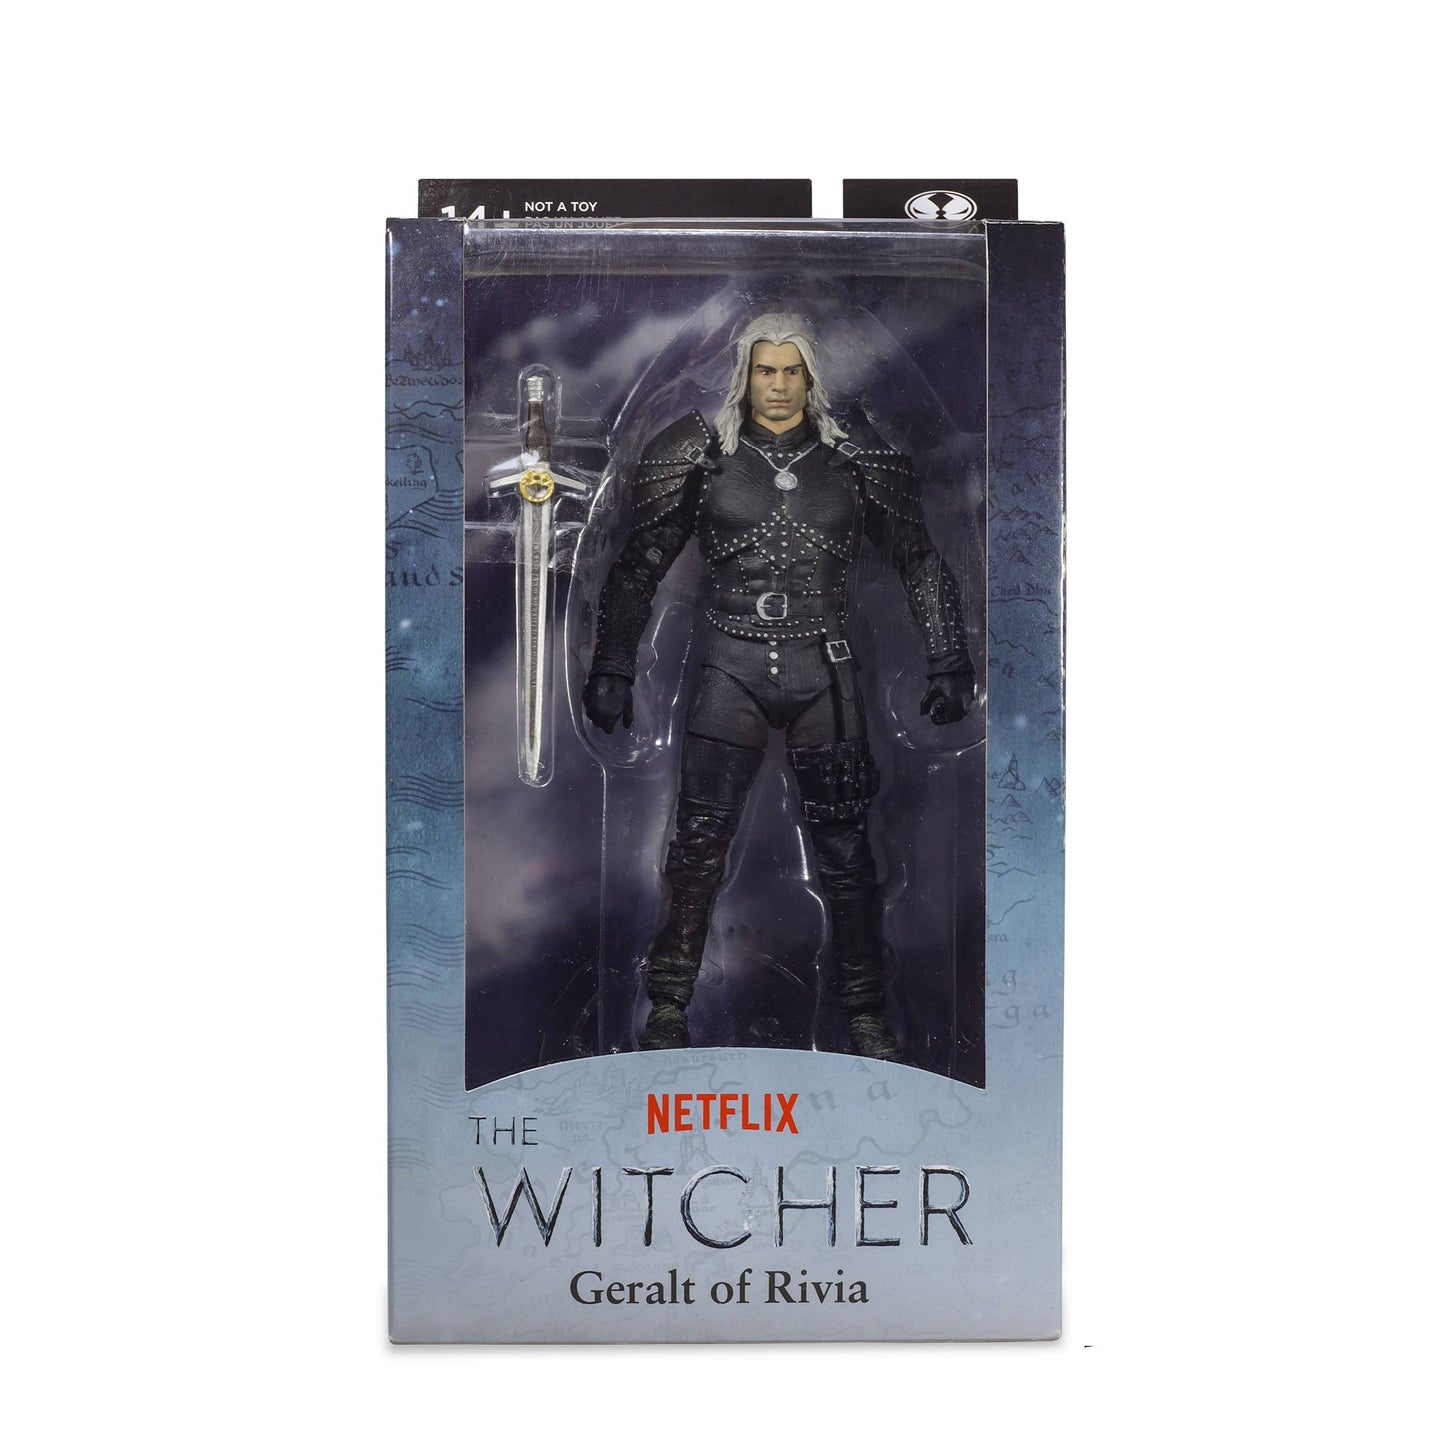 Witcher, The - Geralt Of Rivia (Season 2)